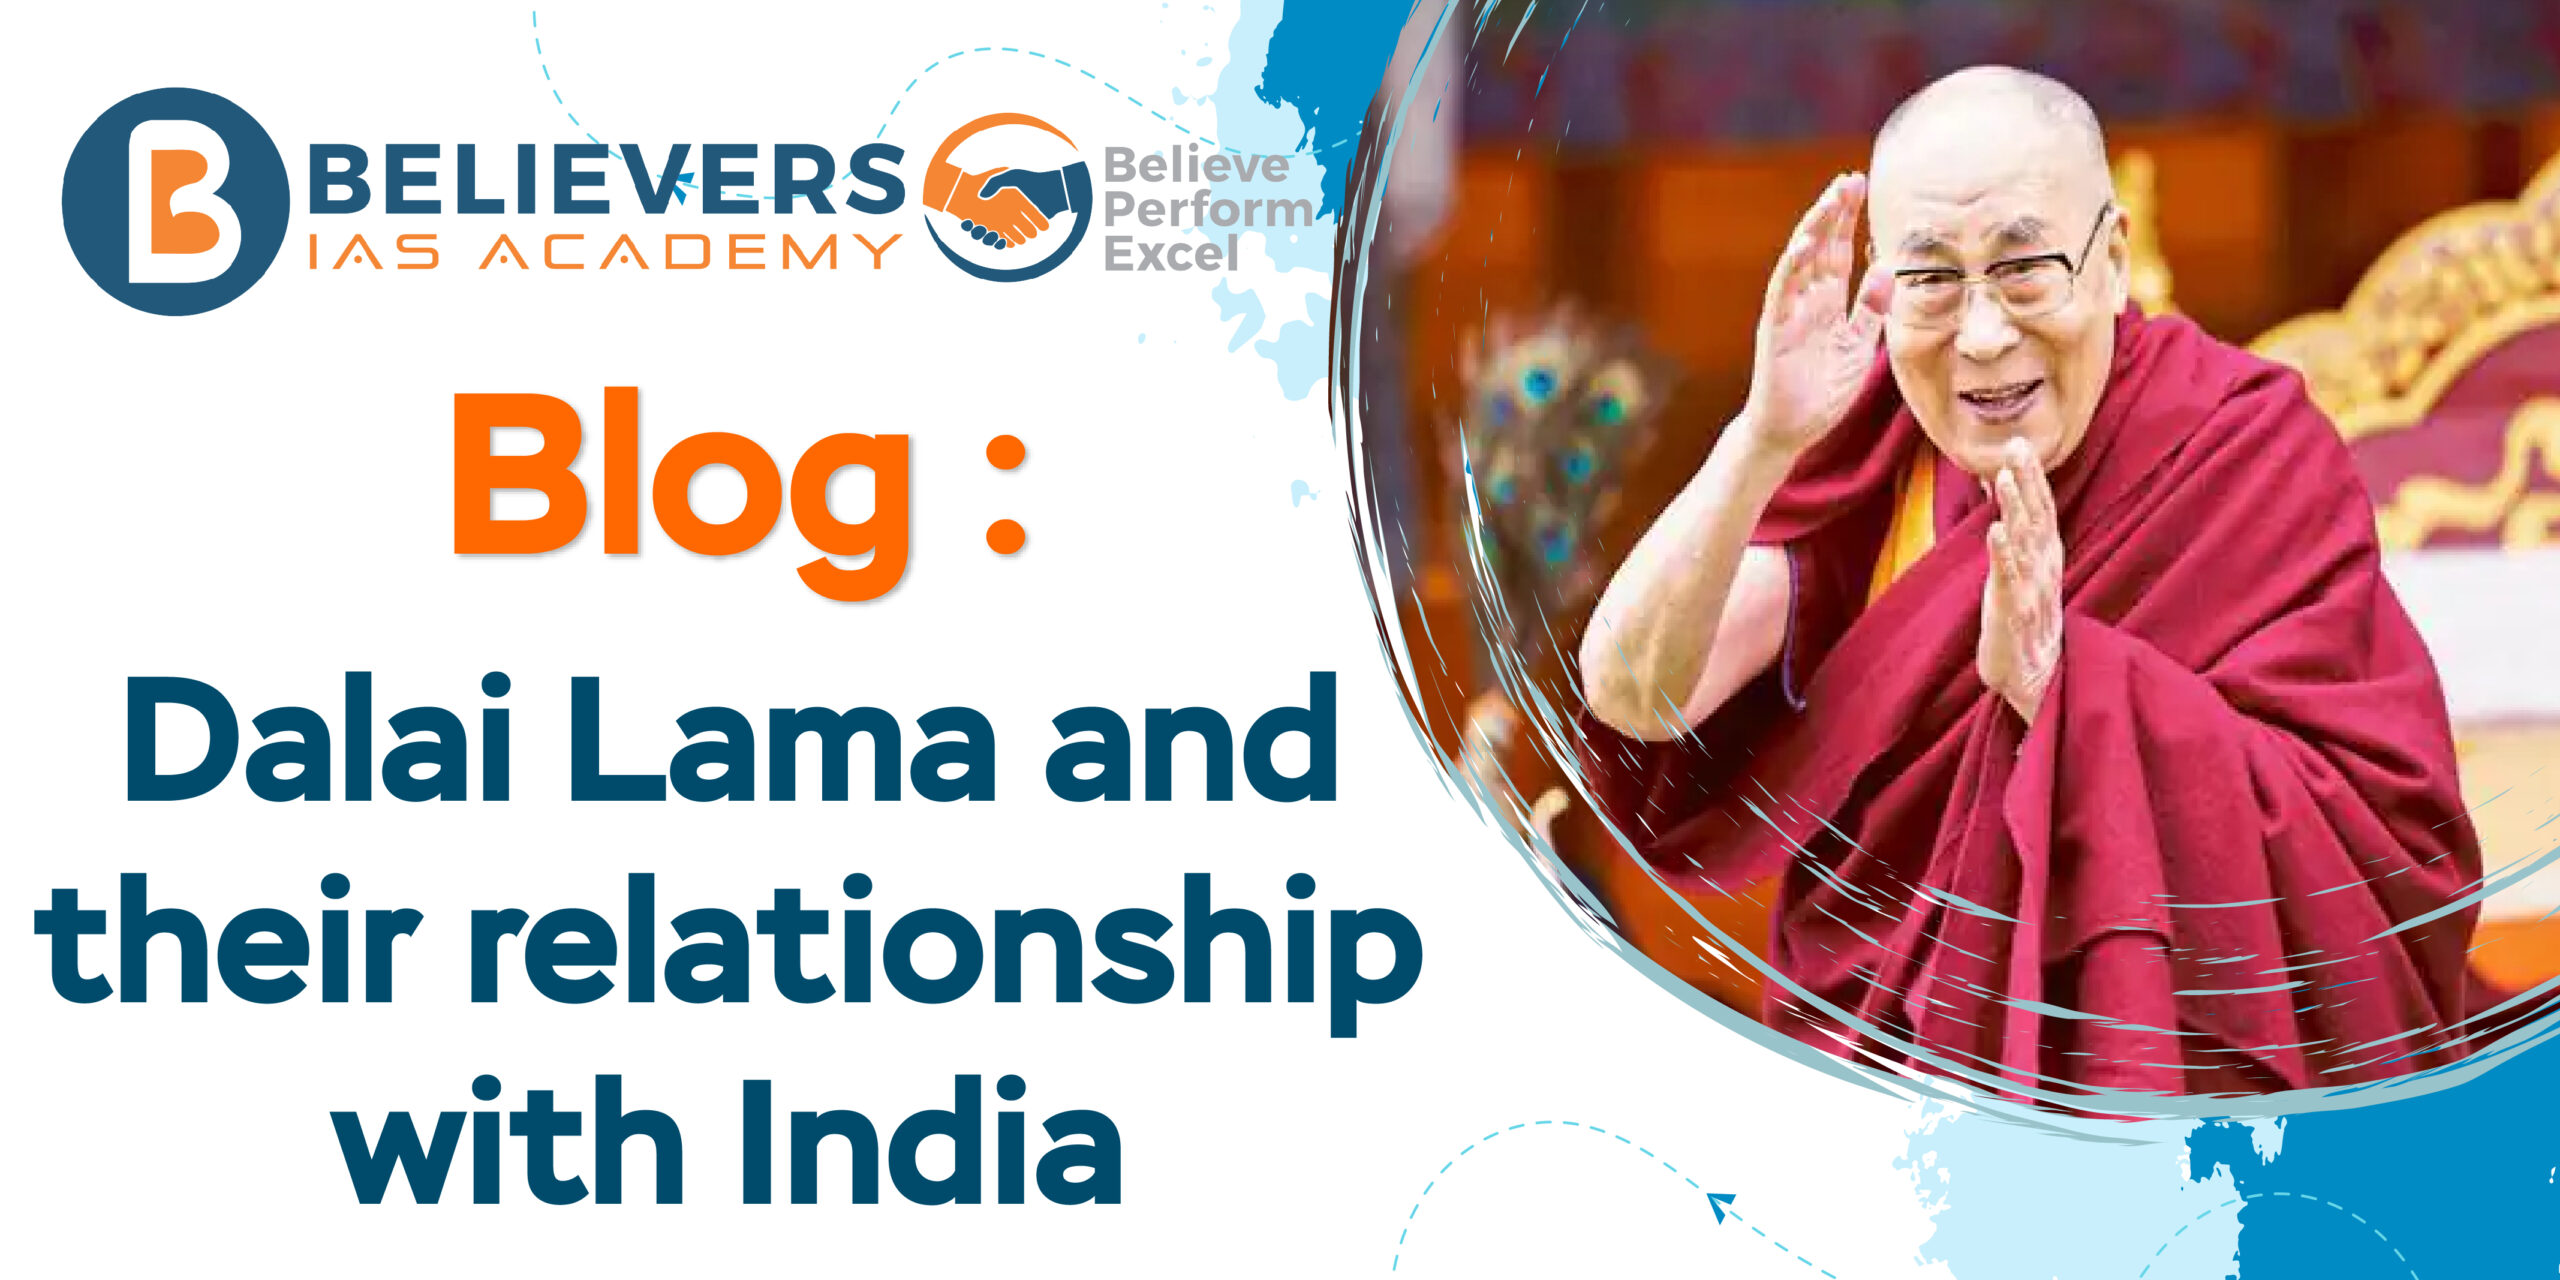 Dalai Lama and their relationship with india